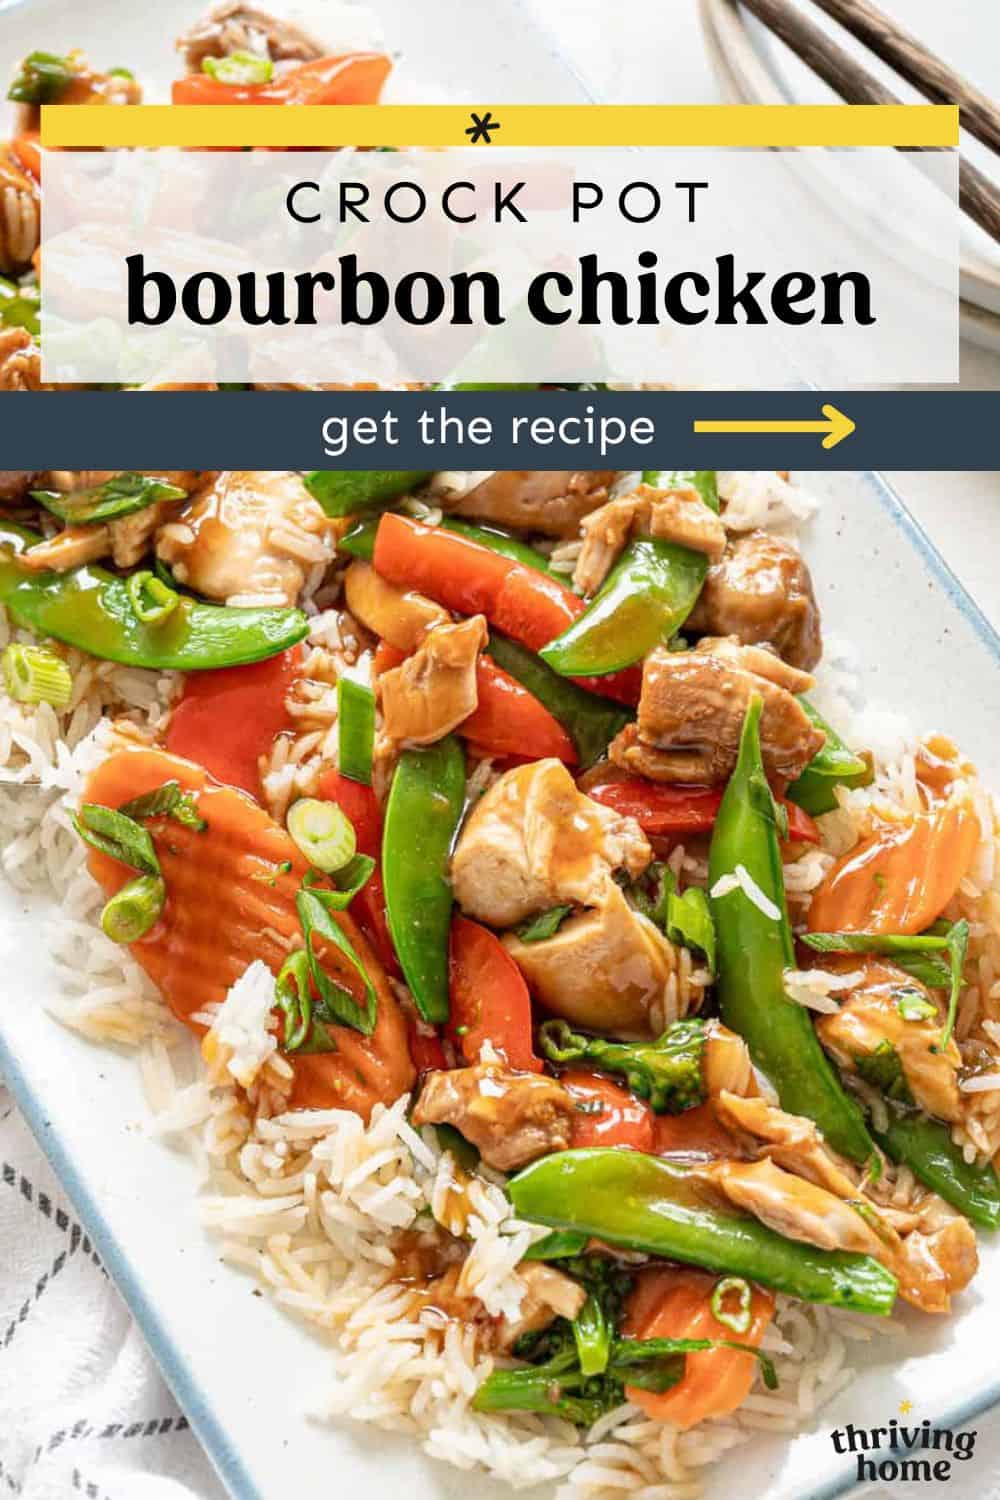 Chicken, stir fry vegetables, and rice on a serving platter with bourbon sauce over the top.